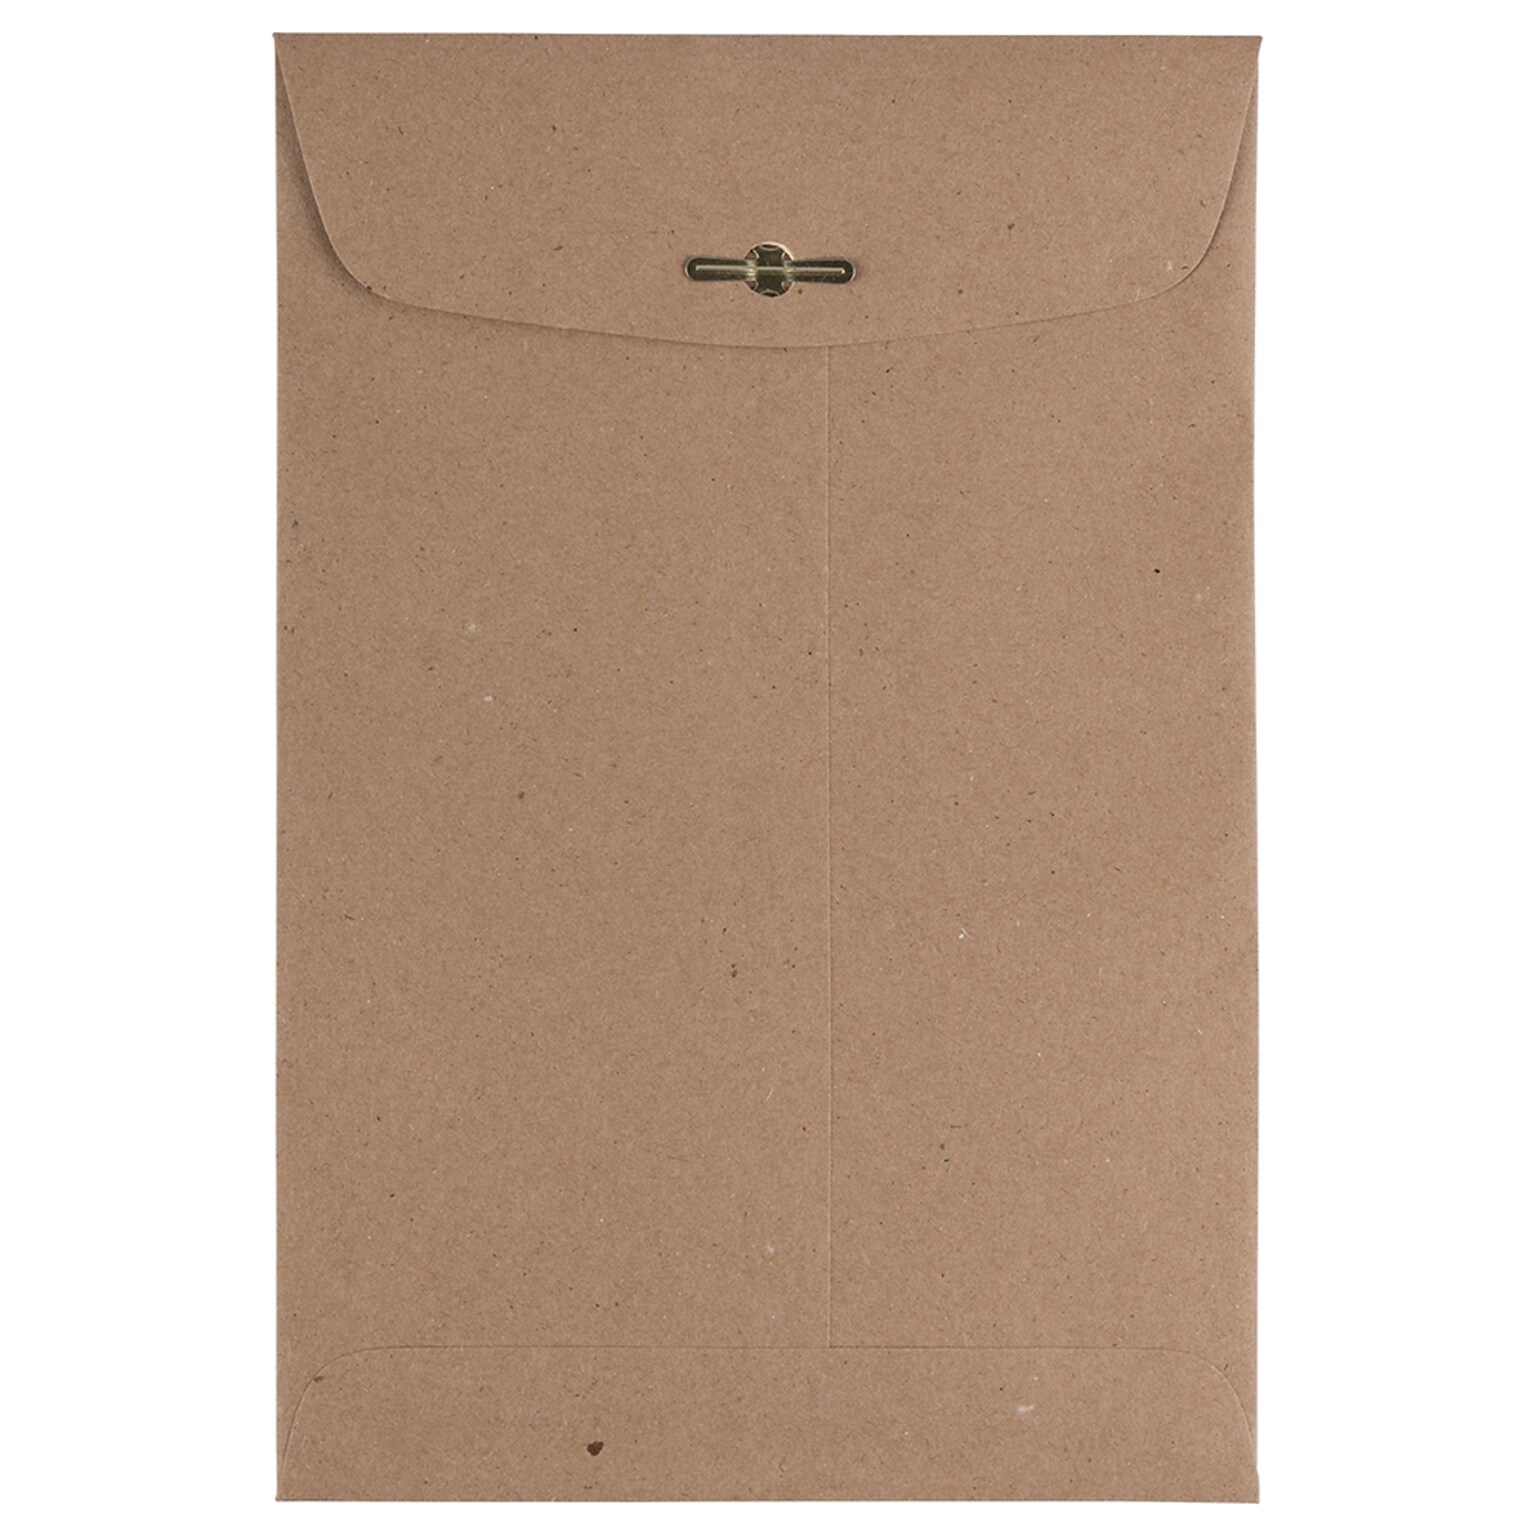 JAM Paper 6 x 9 Open End Catalog Envelopes with Clasp Closure, Brown Kraft Paper Bag, 25/Pack (563120844)